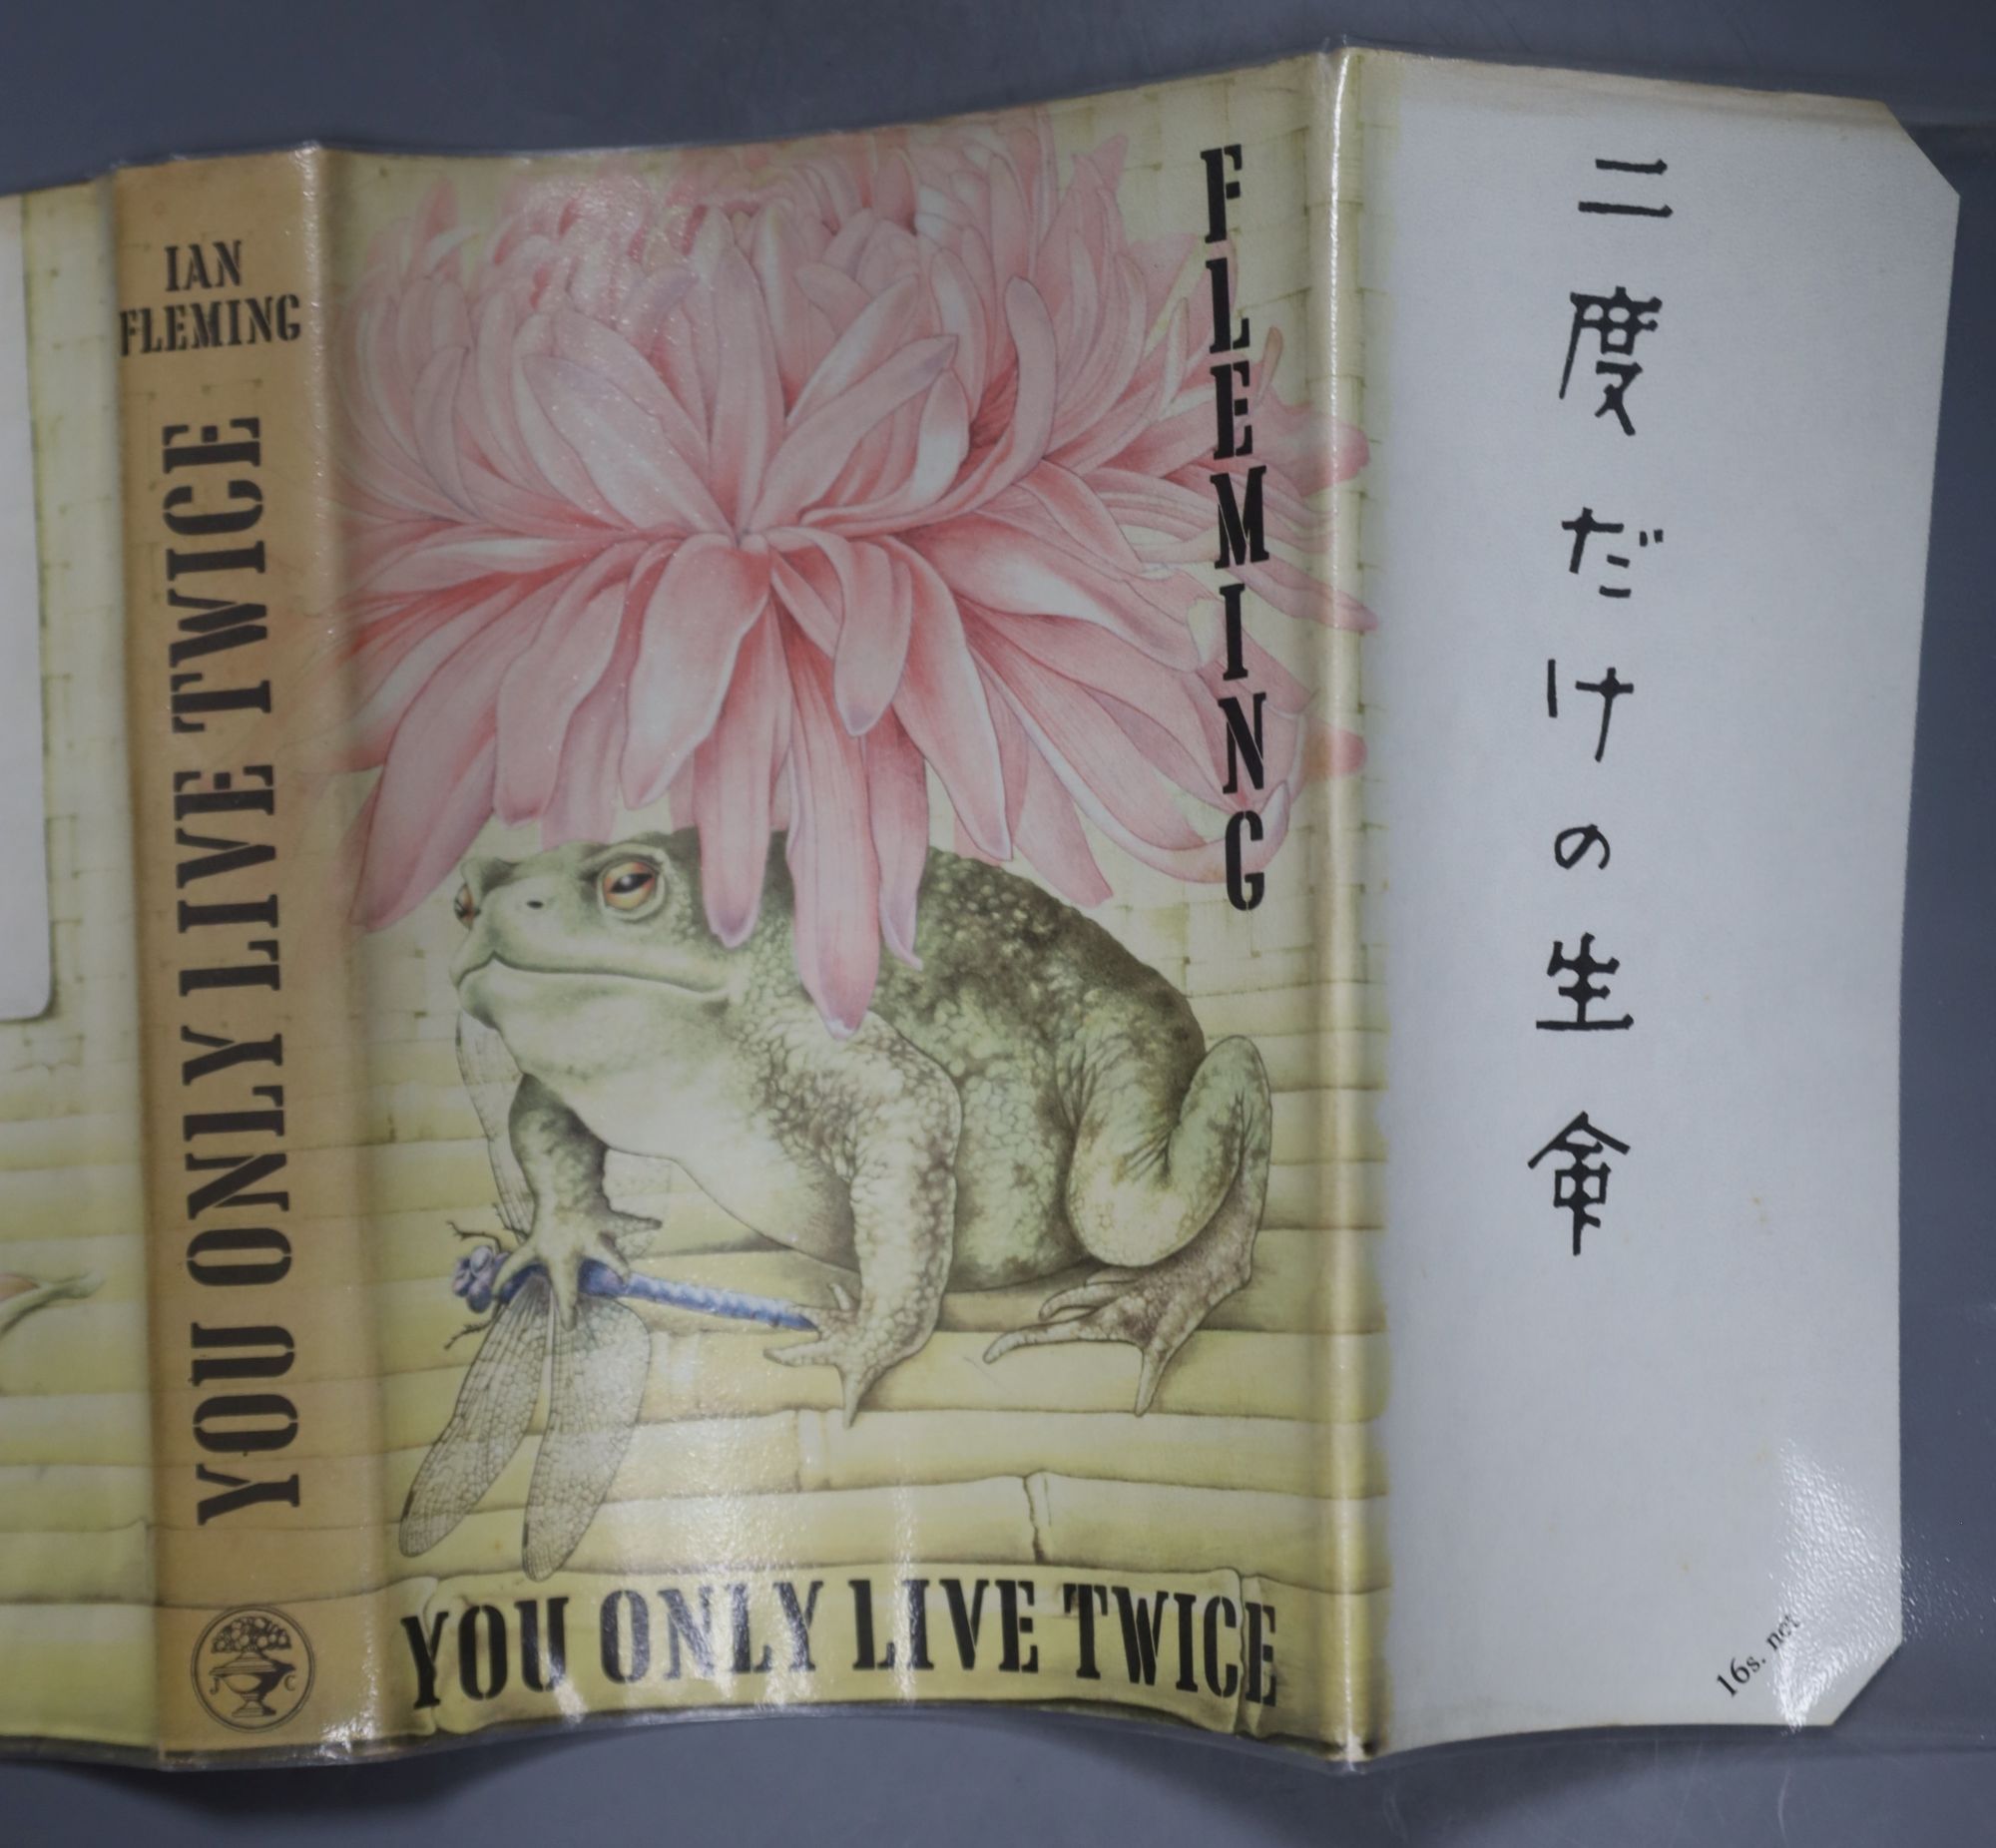 Fleming, Ian - You Only Live Twice, 1st edition (1st impression, 1st state), d/wrapper, 1964